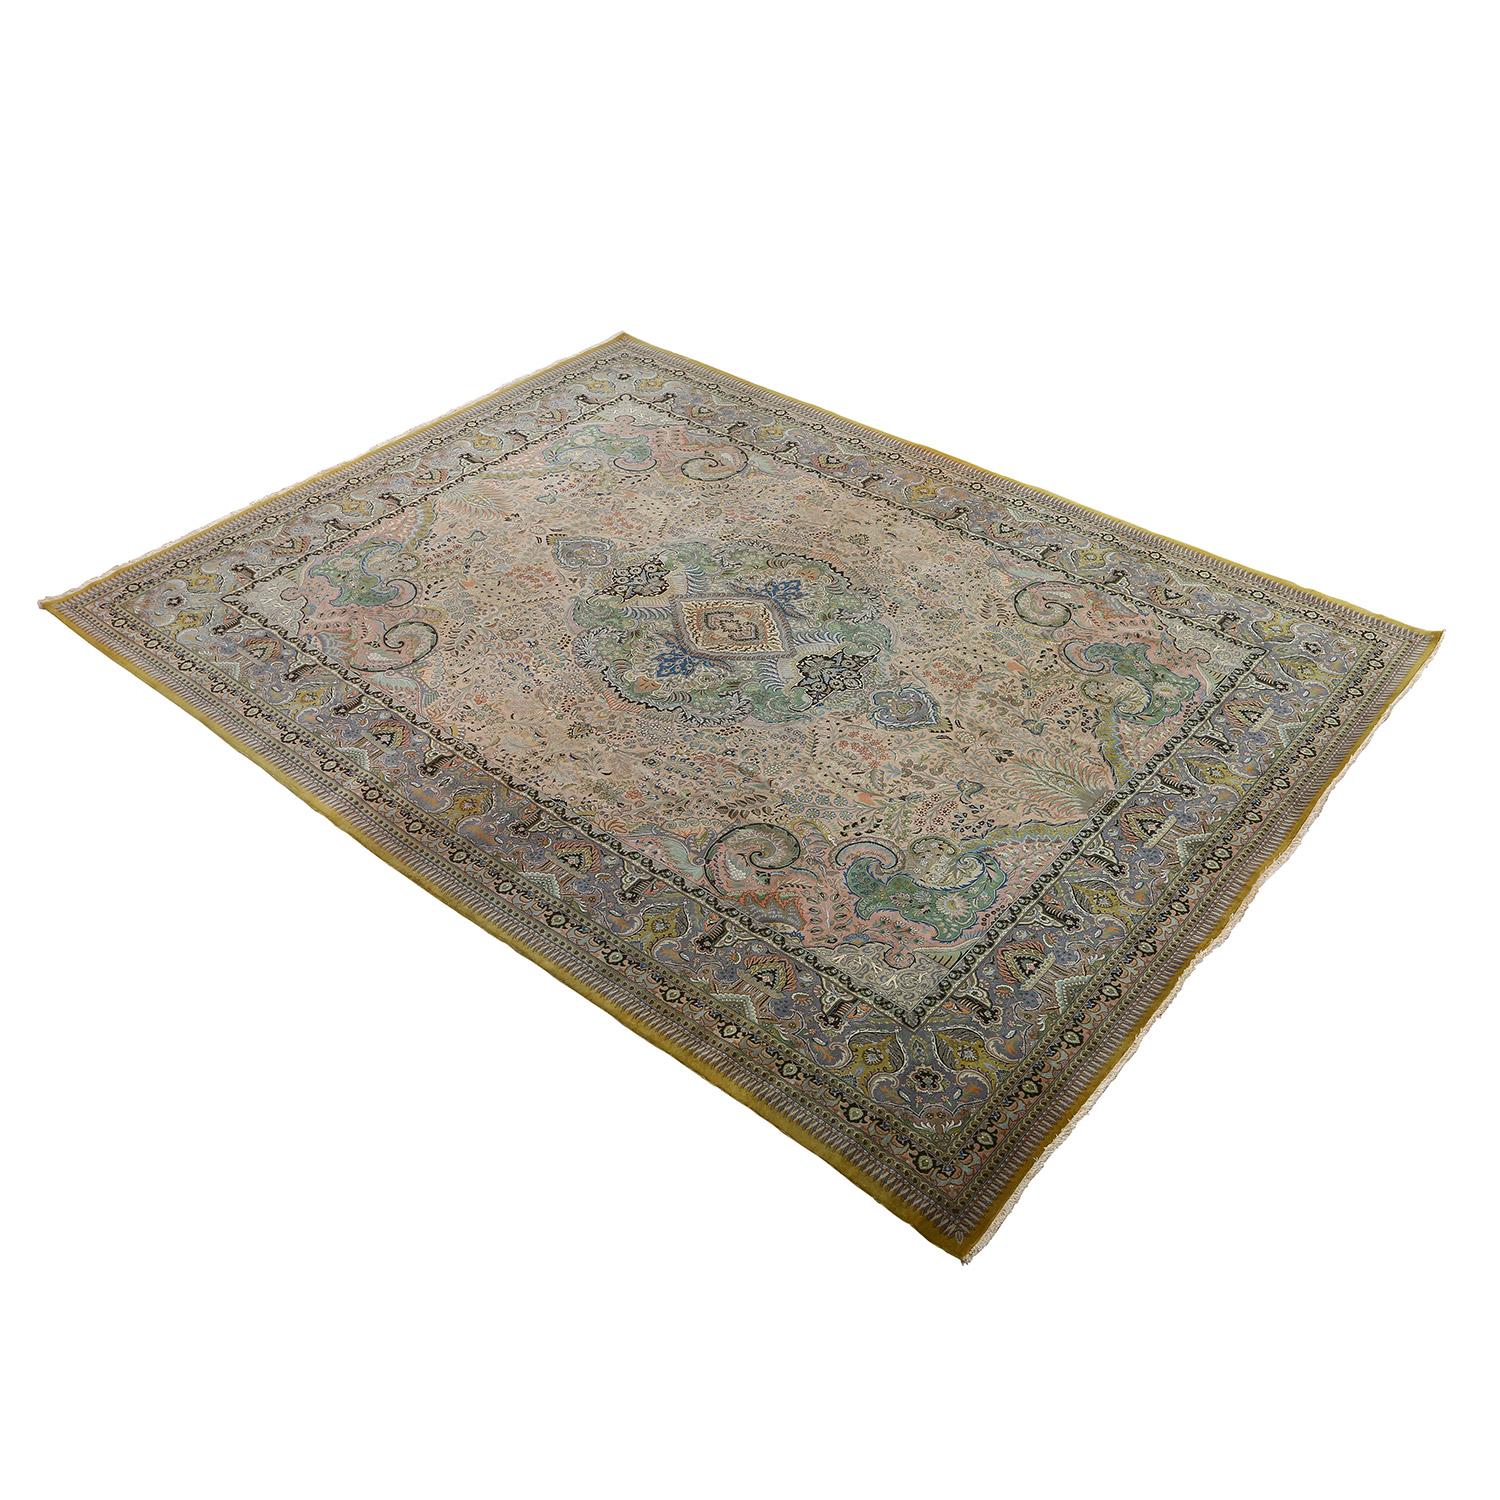 This Tabriz rug boasts a unique and luxurious construction, with a fork pile and a silk foundation, creating an exquisite blend of textures and durability. The contrast between the silk foundation and forked wool pile gives this rug a tactile